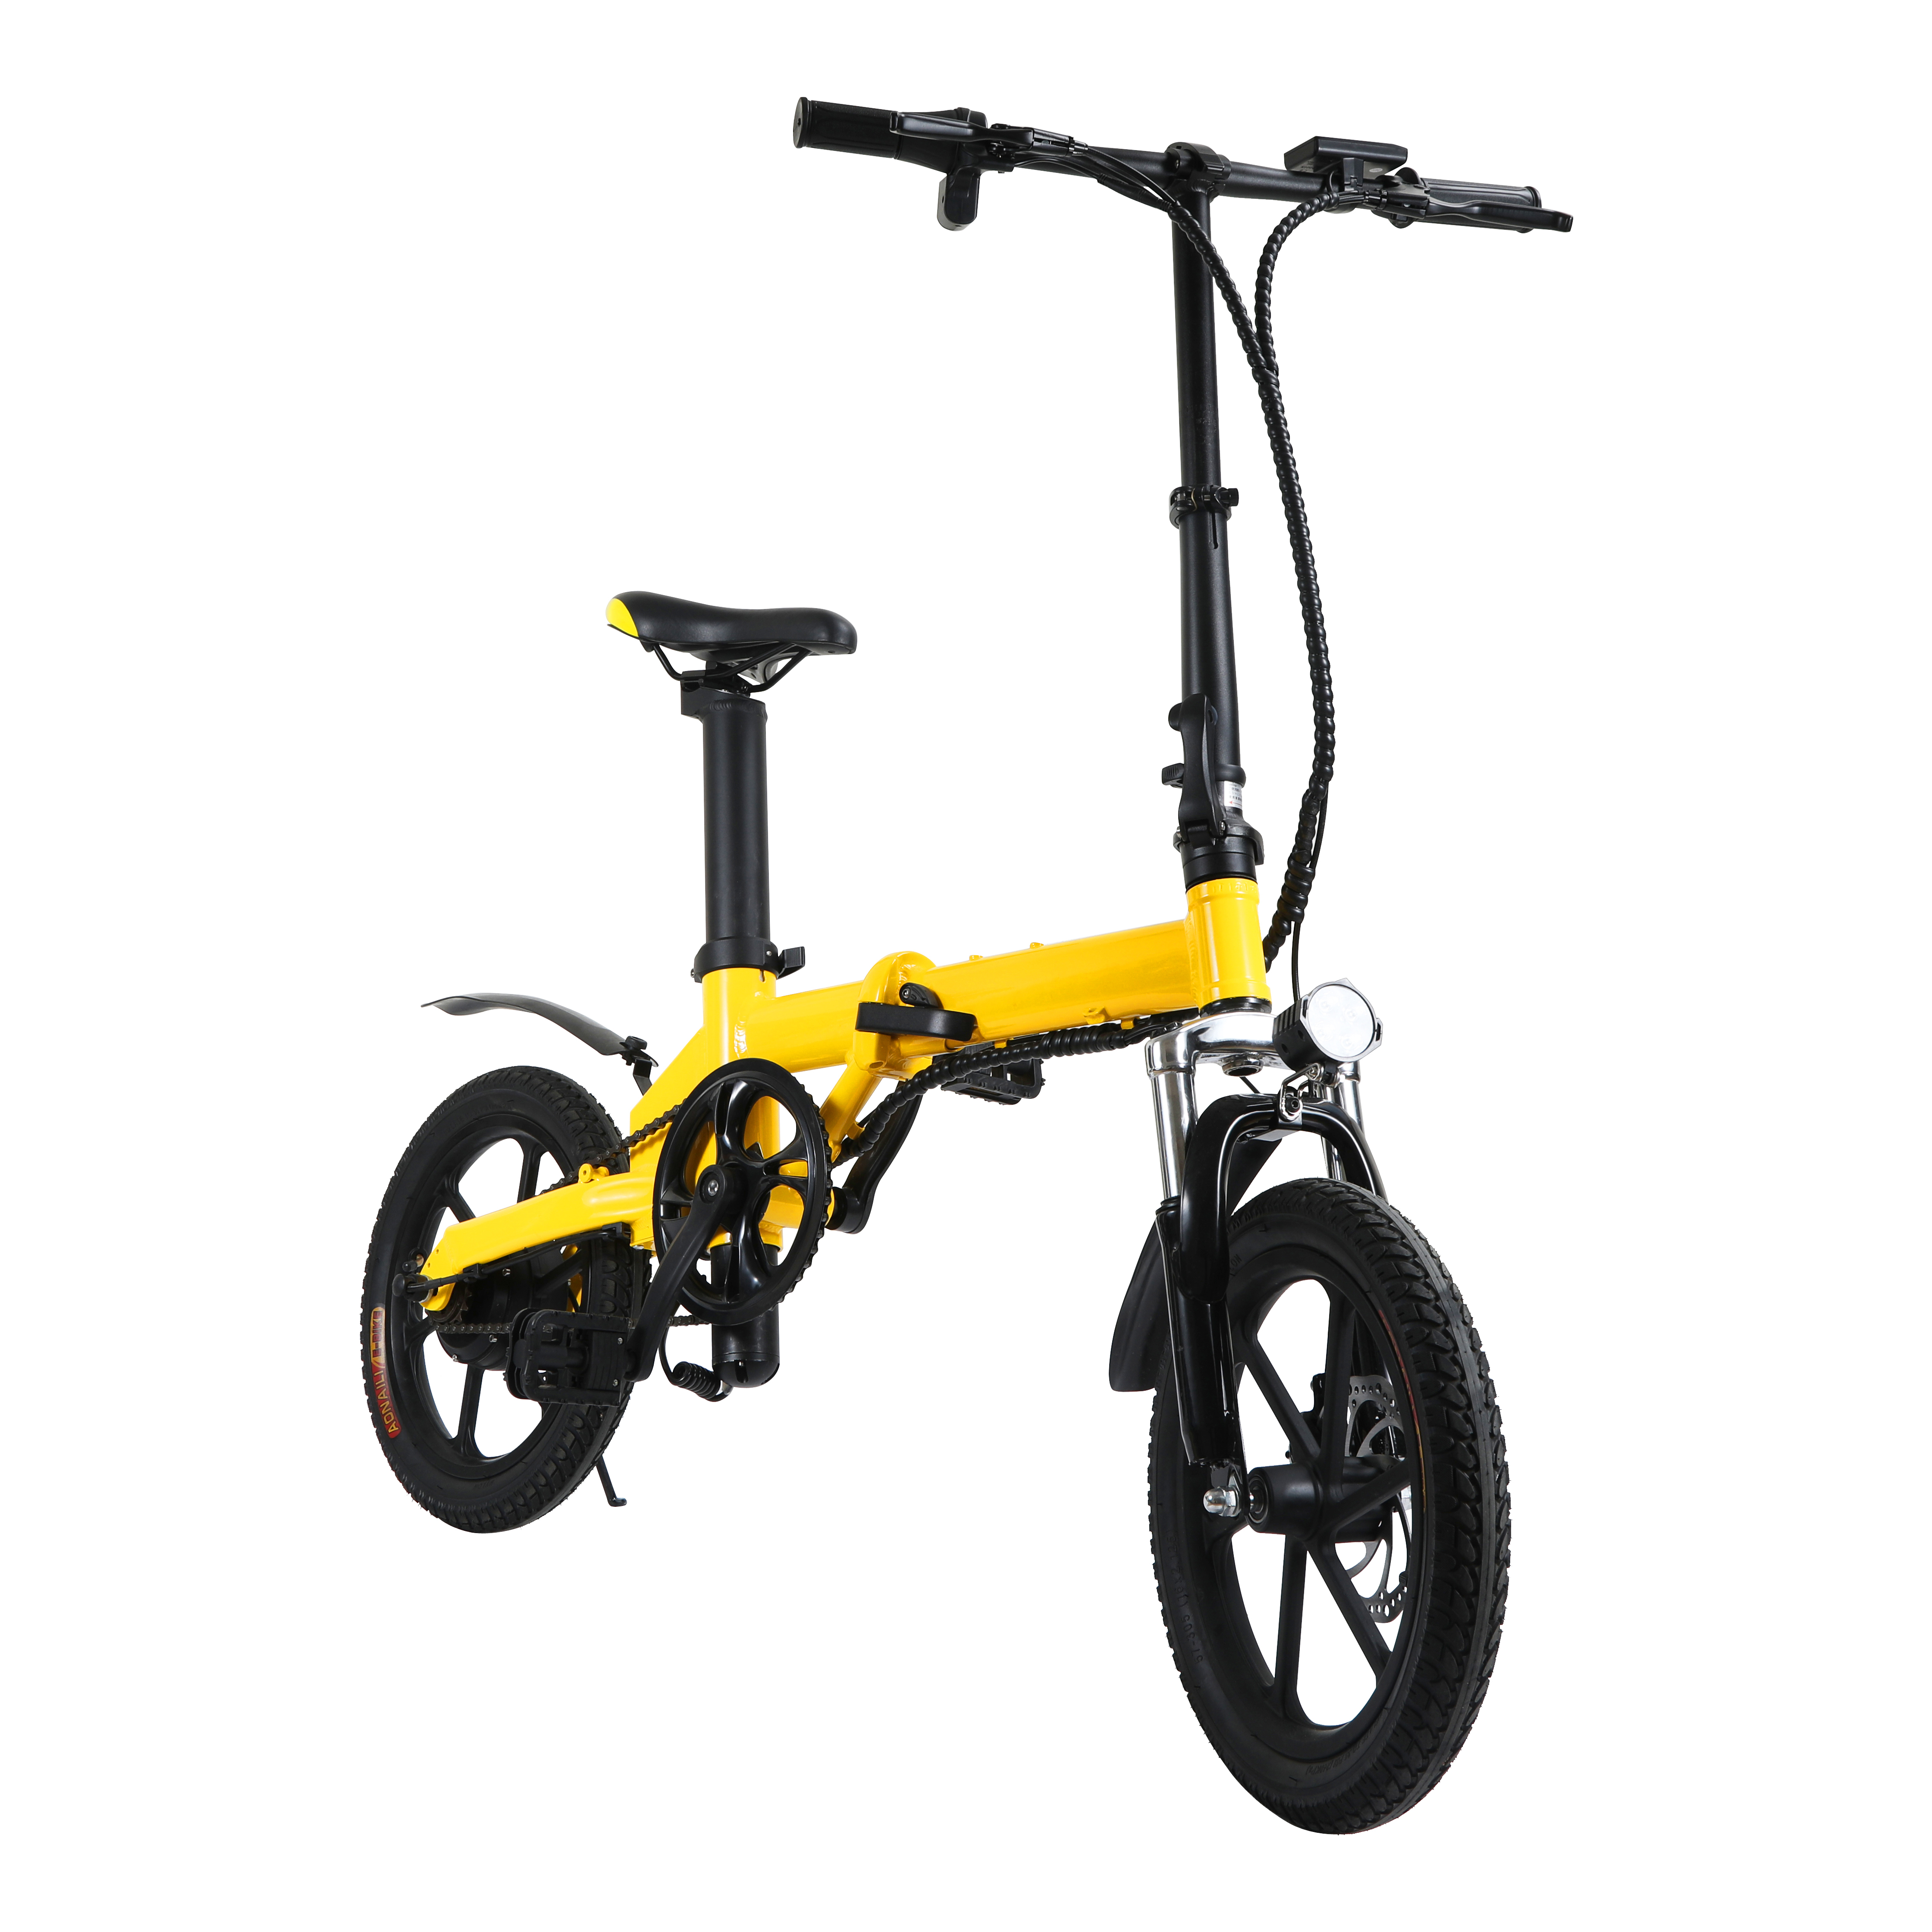 Cheap PriceList for Electric Bicycle With Hidden Battery -
 Electric Bike 16 inch Foldable E-Bike VB160 – Vitek